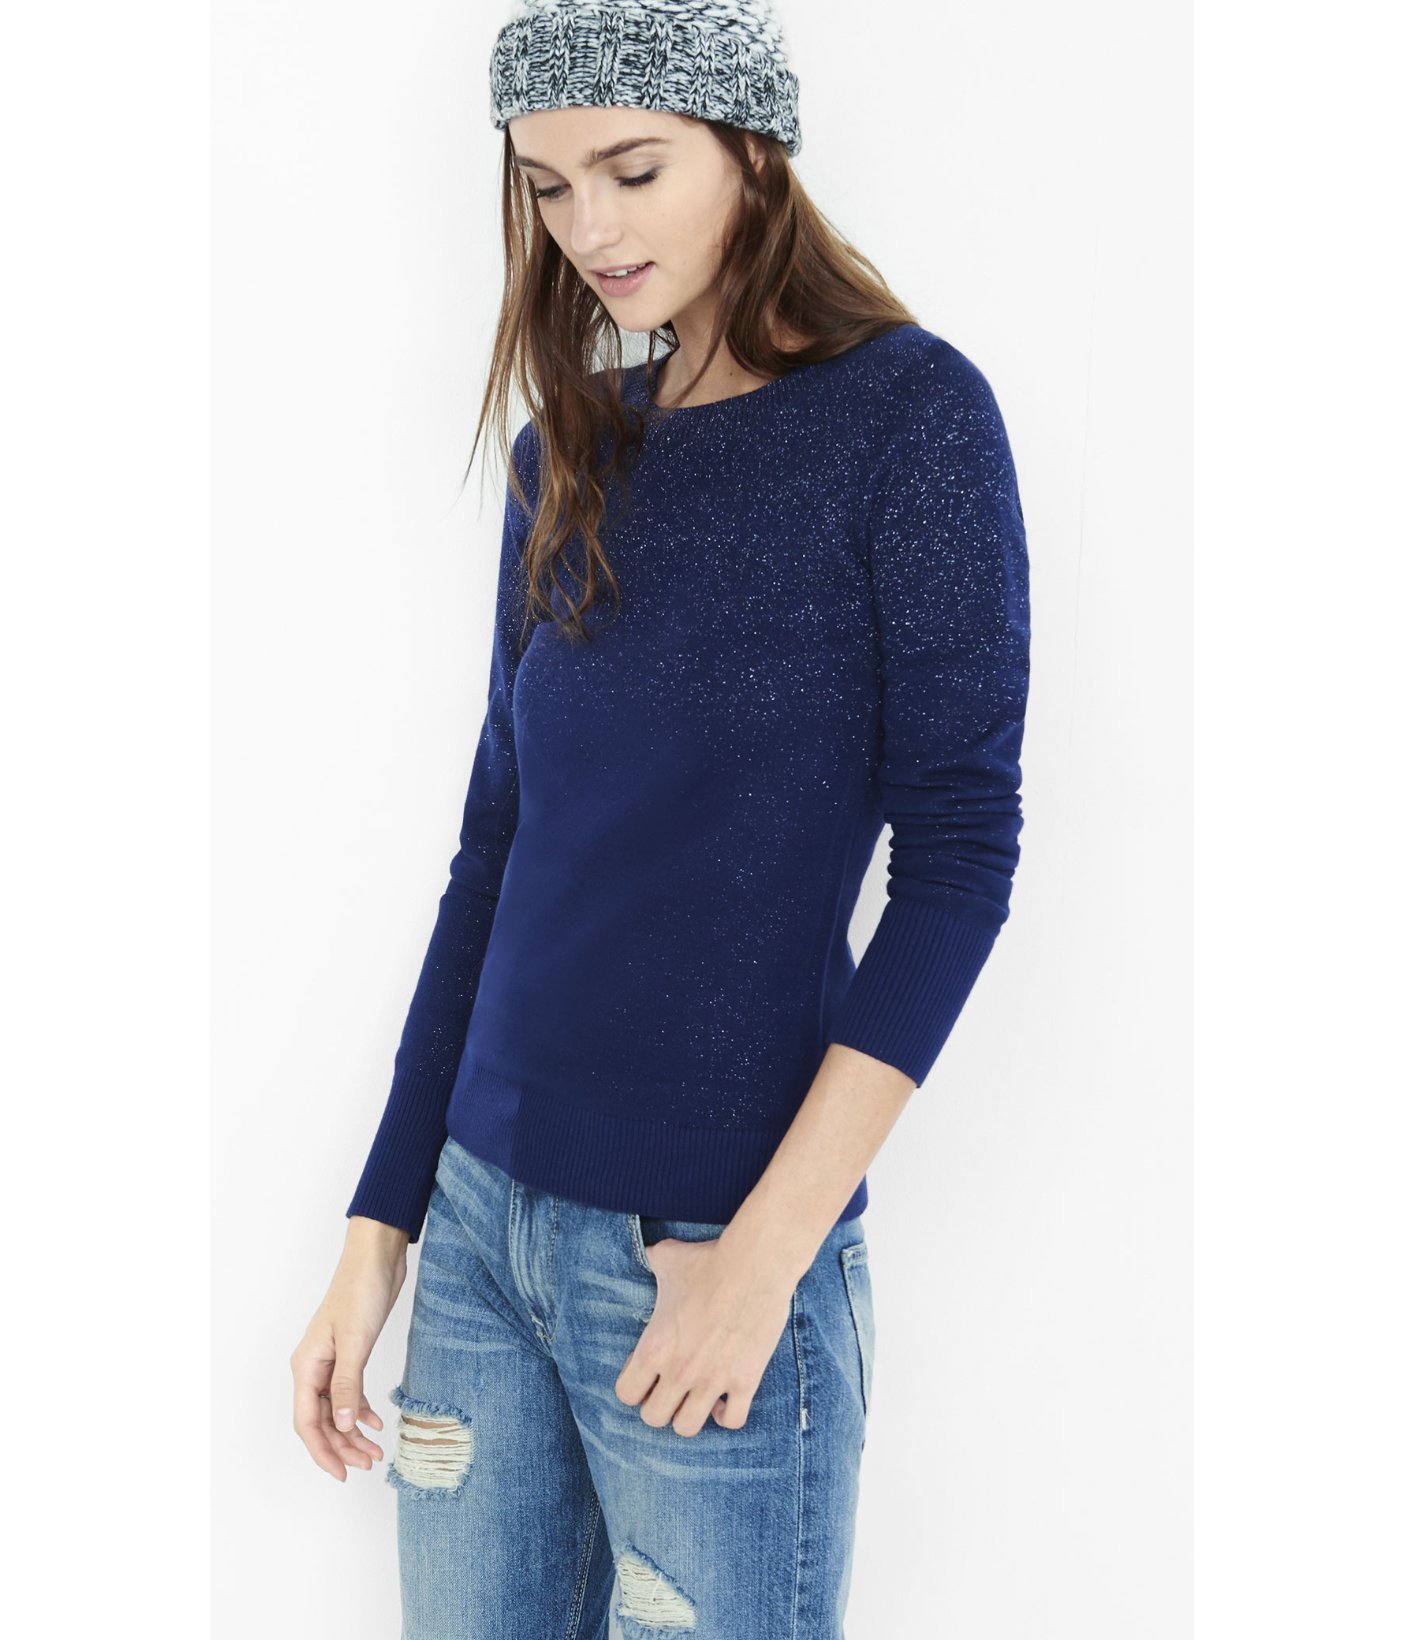 Express Metallic Ombre Fitted Crew Neck Sweater in Blue | Lyst